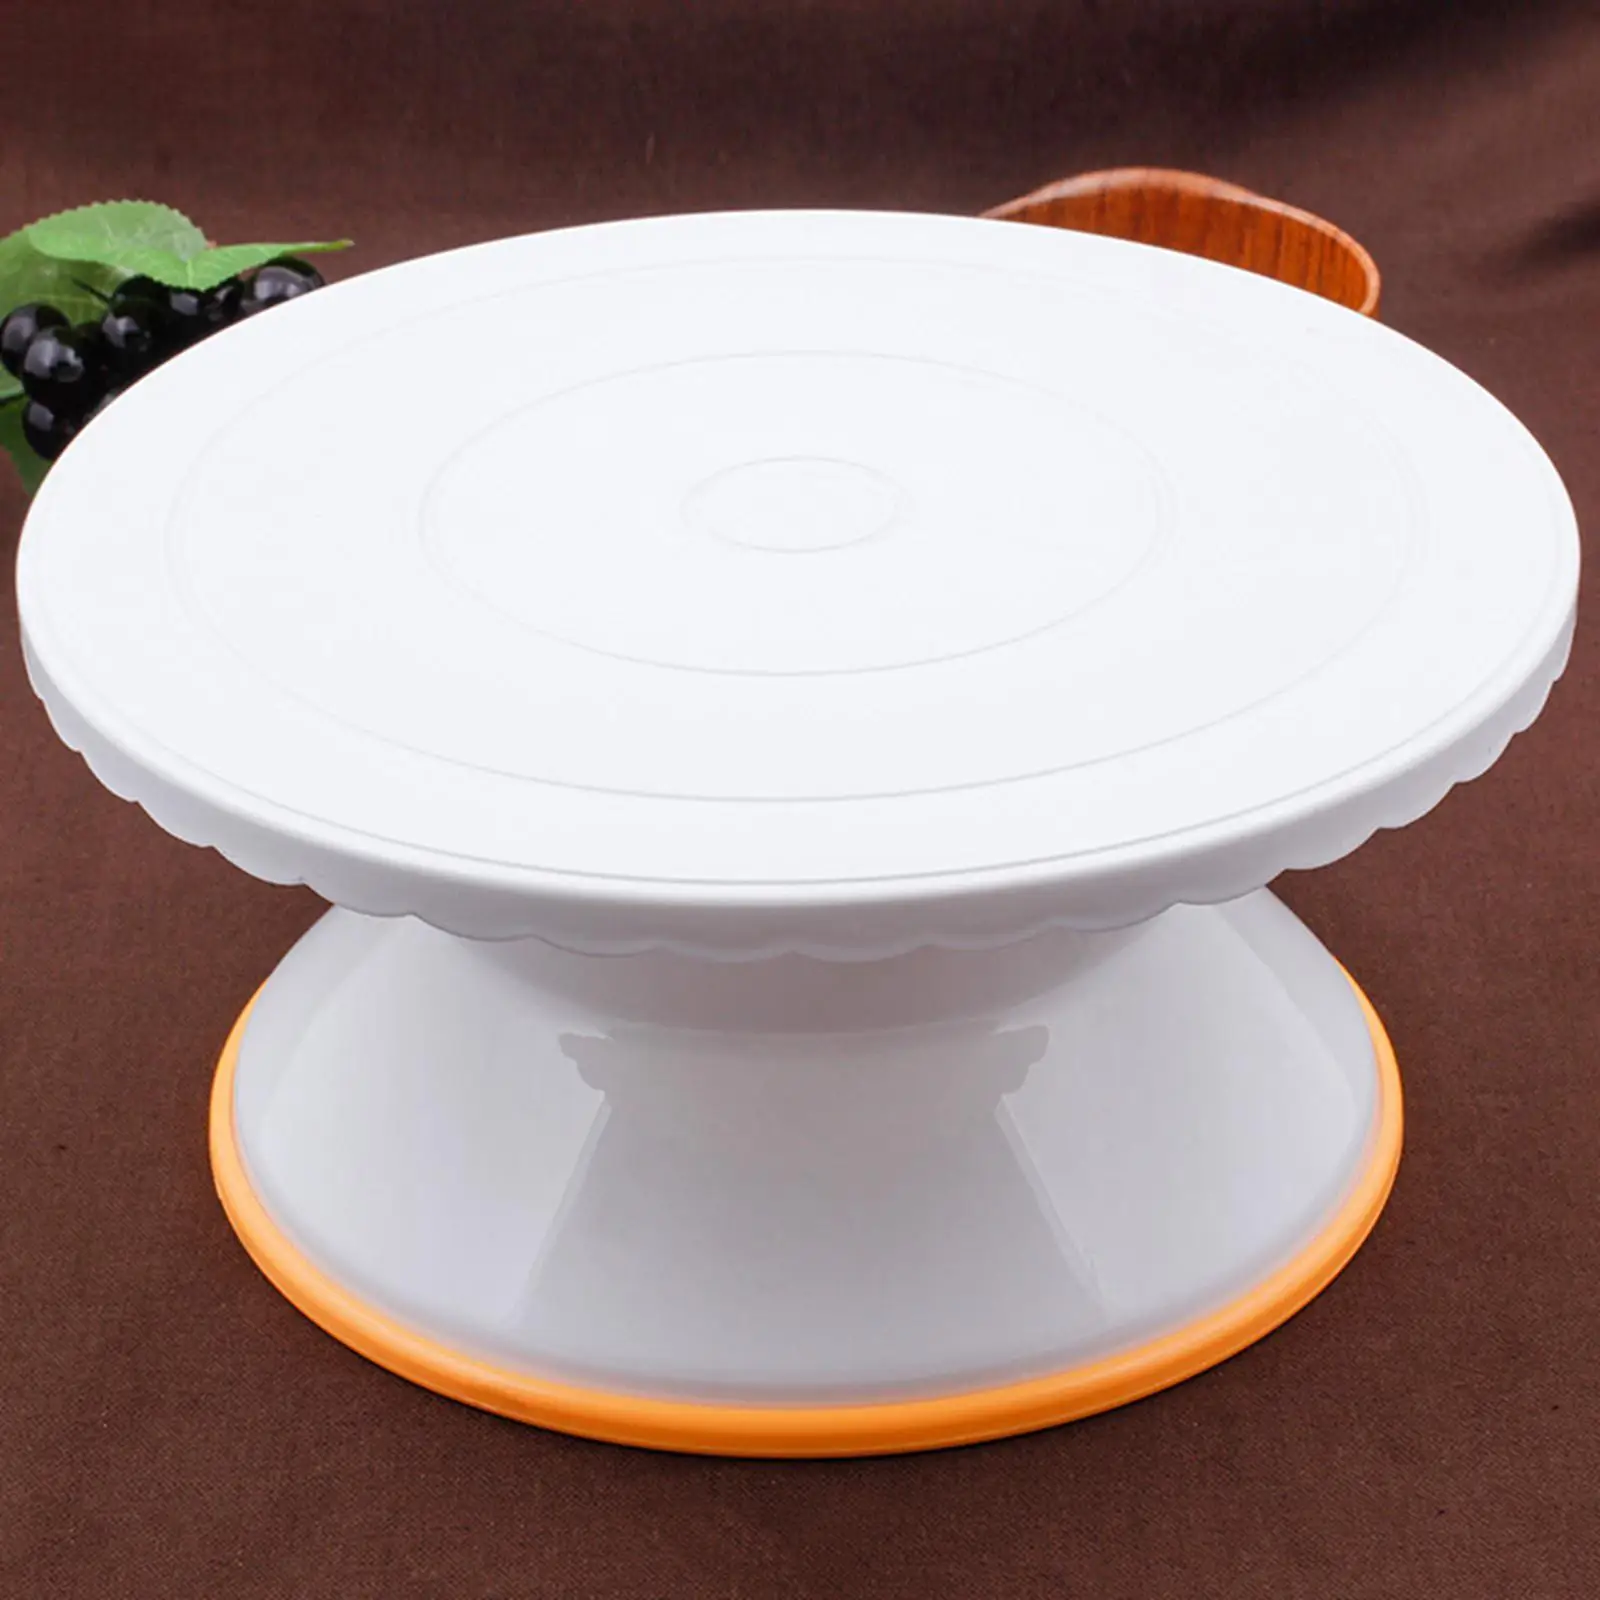 Turntable Cake Stand Kitchen DIY Baking Tool Plastic Cake Decorating Accessories